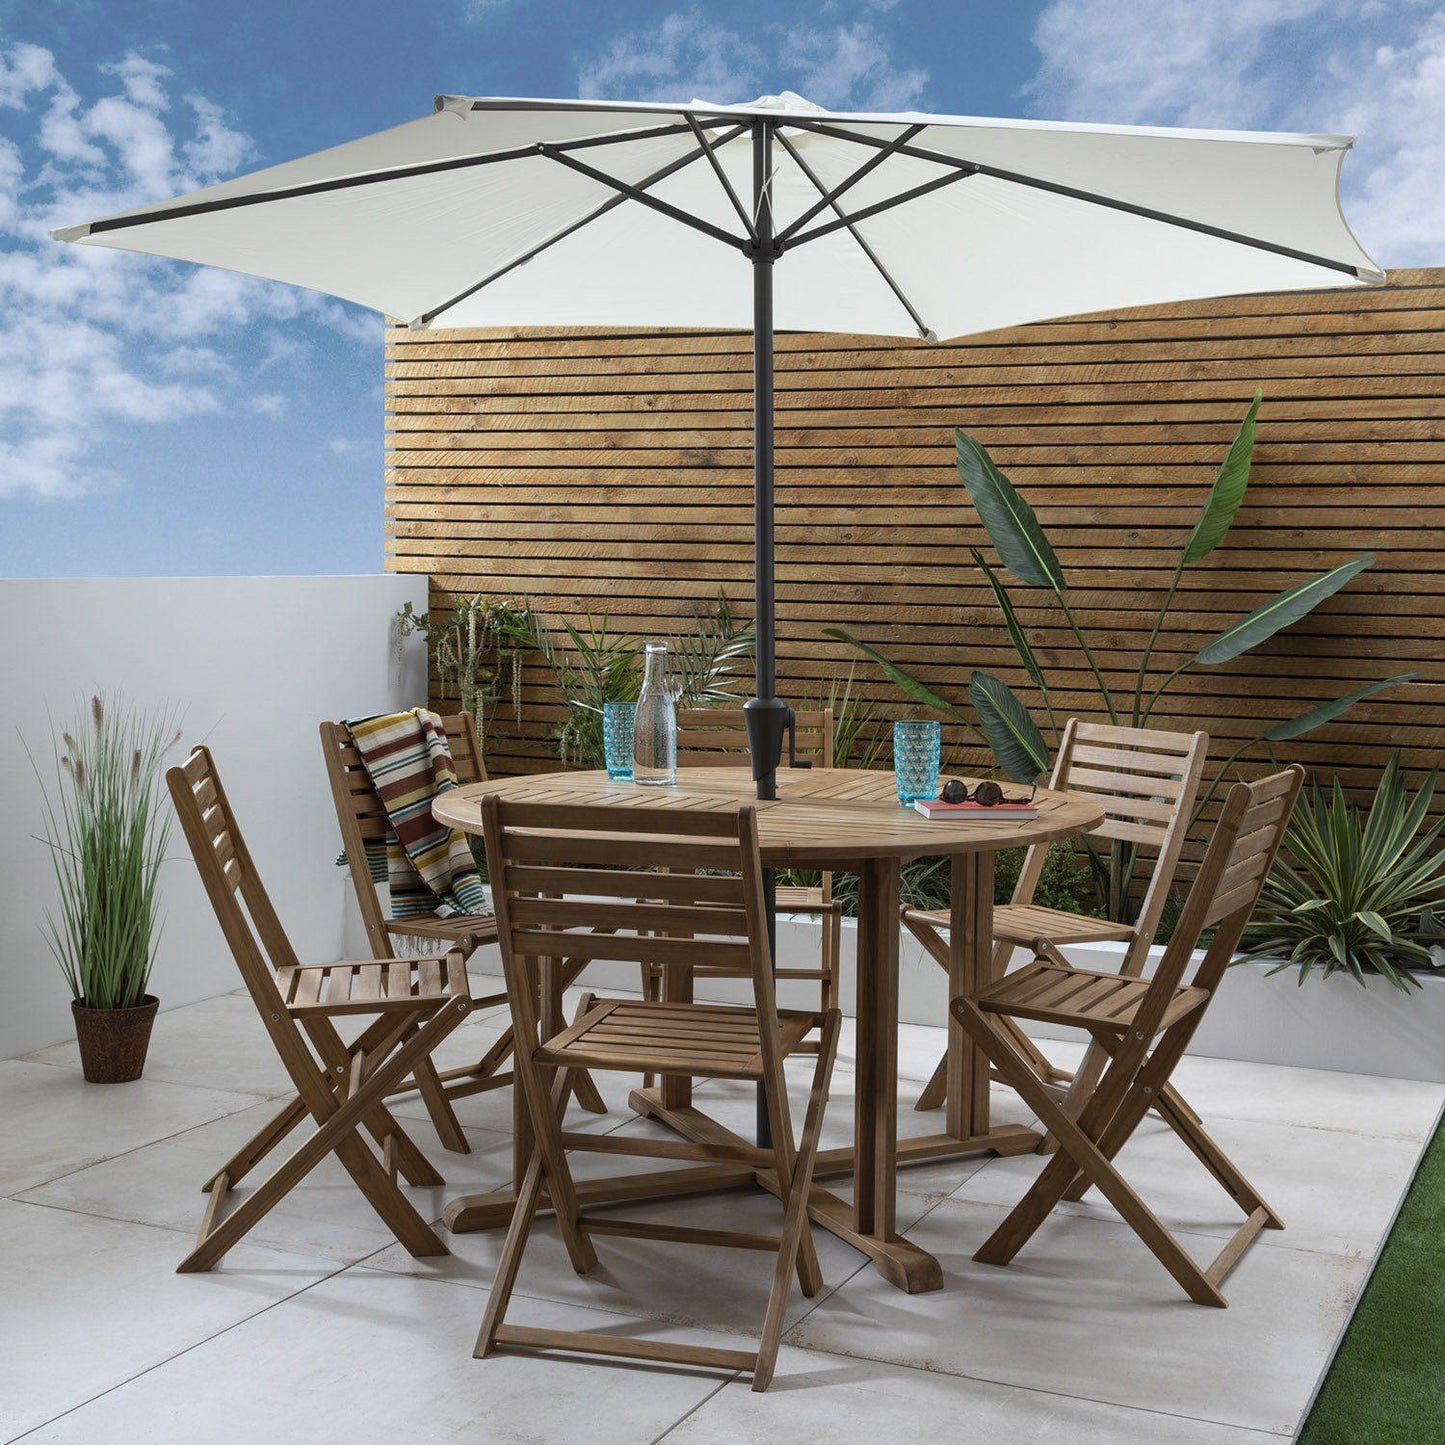 Casey wooden garden furniture - 6 seater outdoor dining set with cream parasol - Laura James